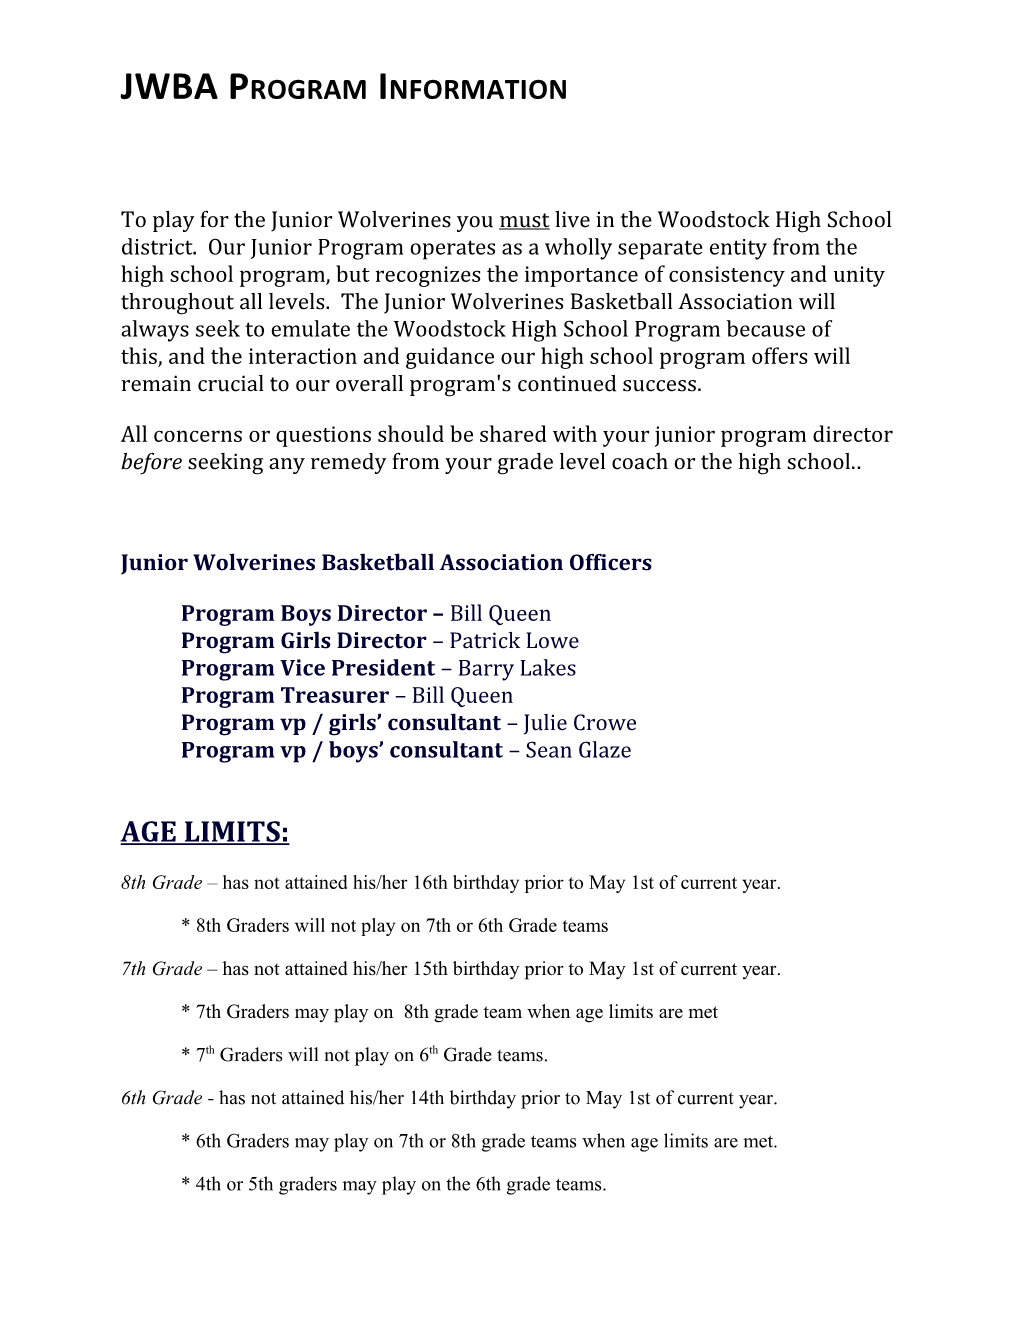 To Play for the Junior Wolverines You Must Live in the Woodstock High School District